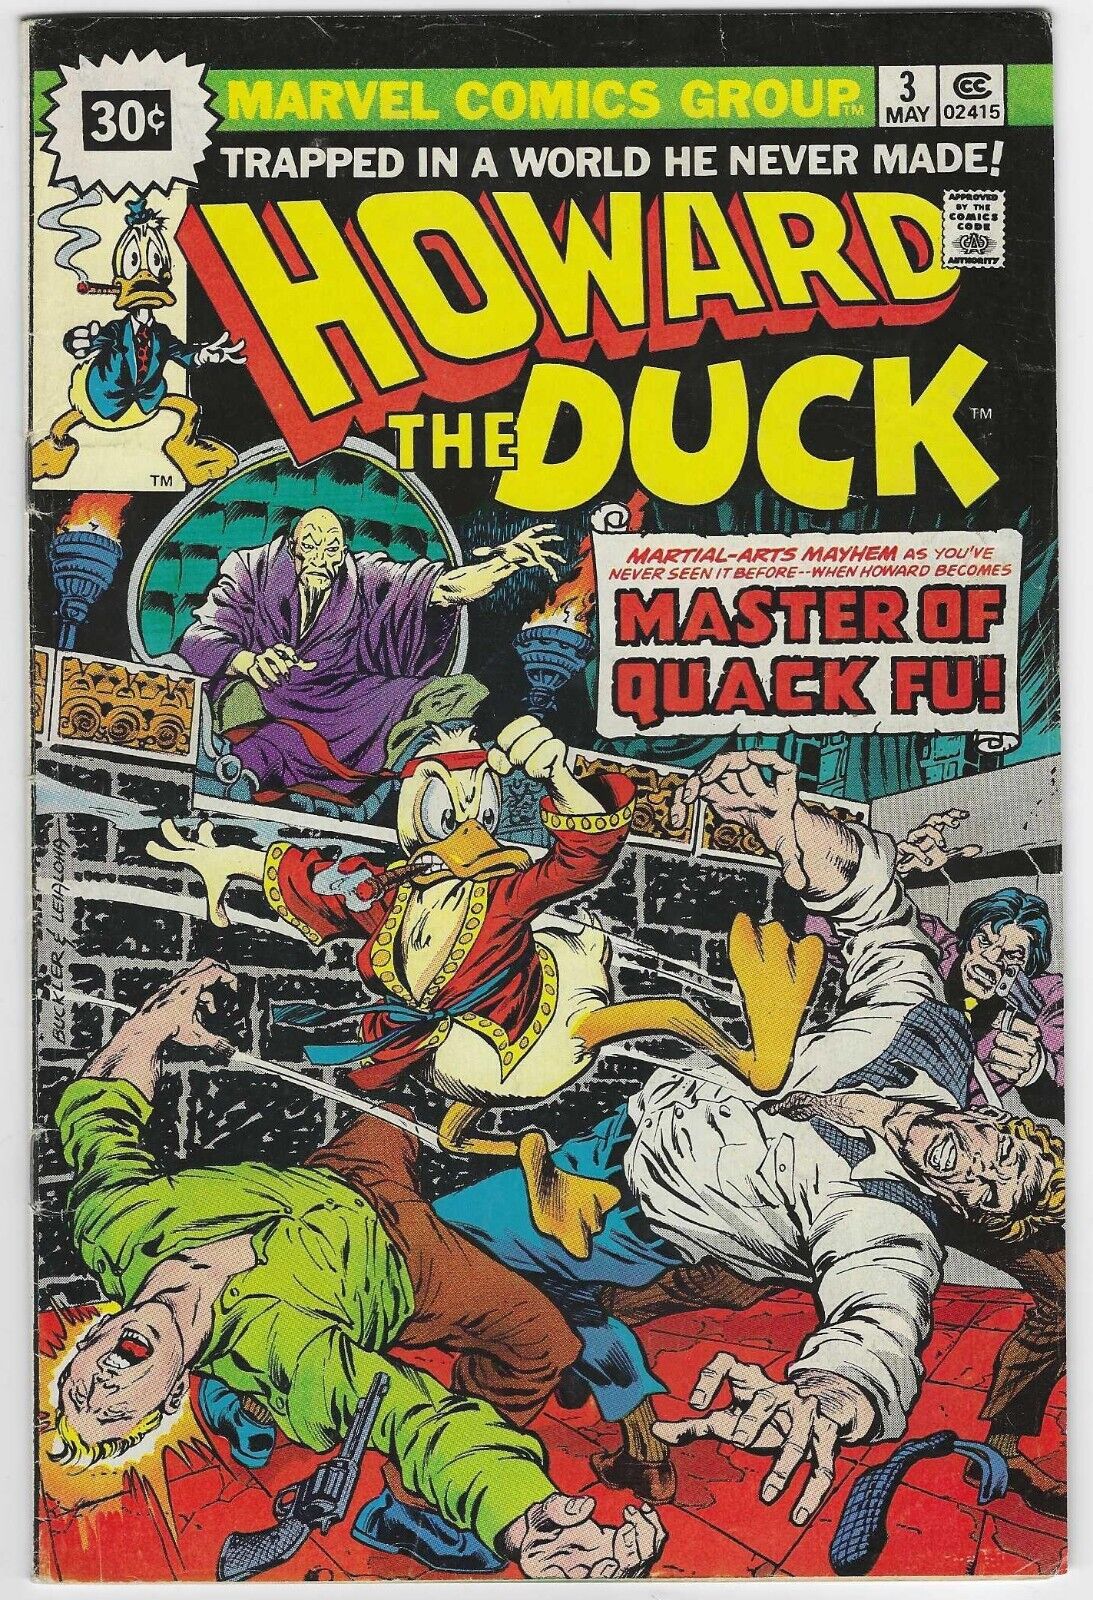 HOWARD THE DUCK 3 30 CENT PRICE VARIANT F .30 MARVEL MASTER OF QUACK FU